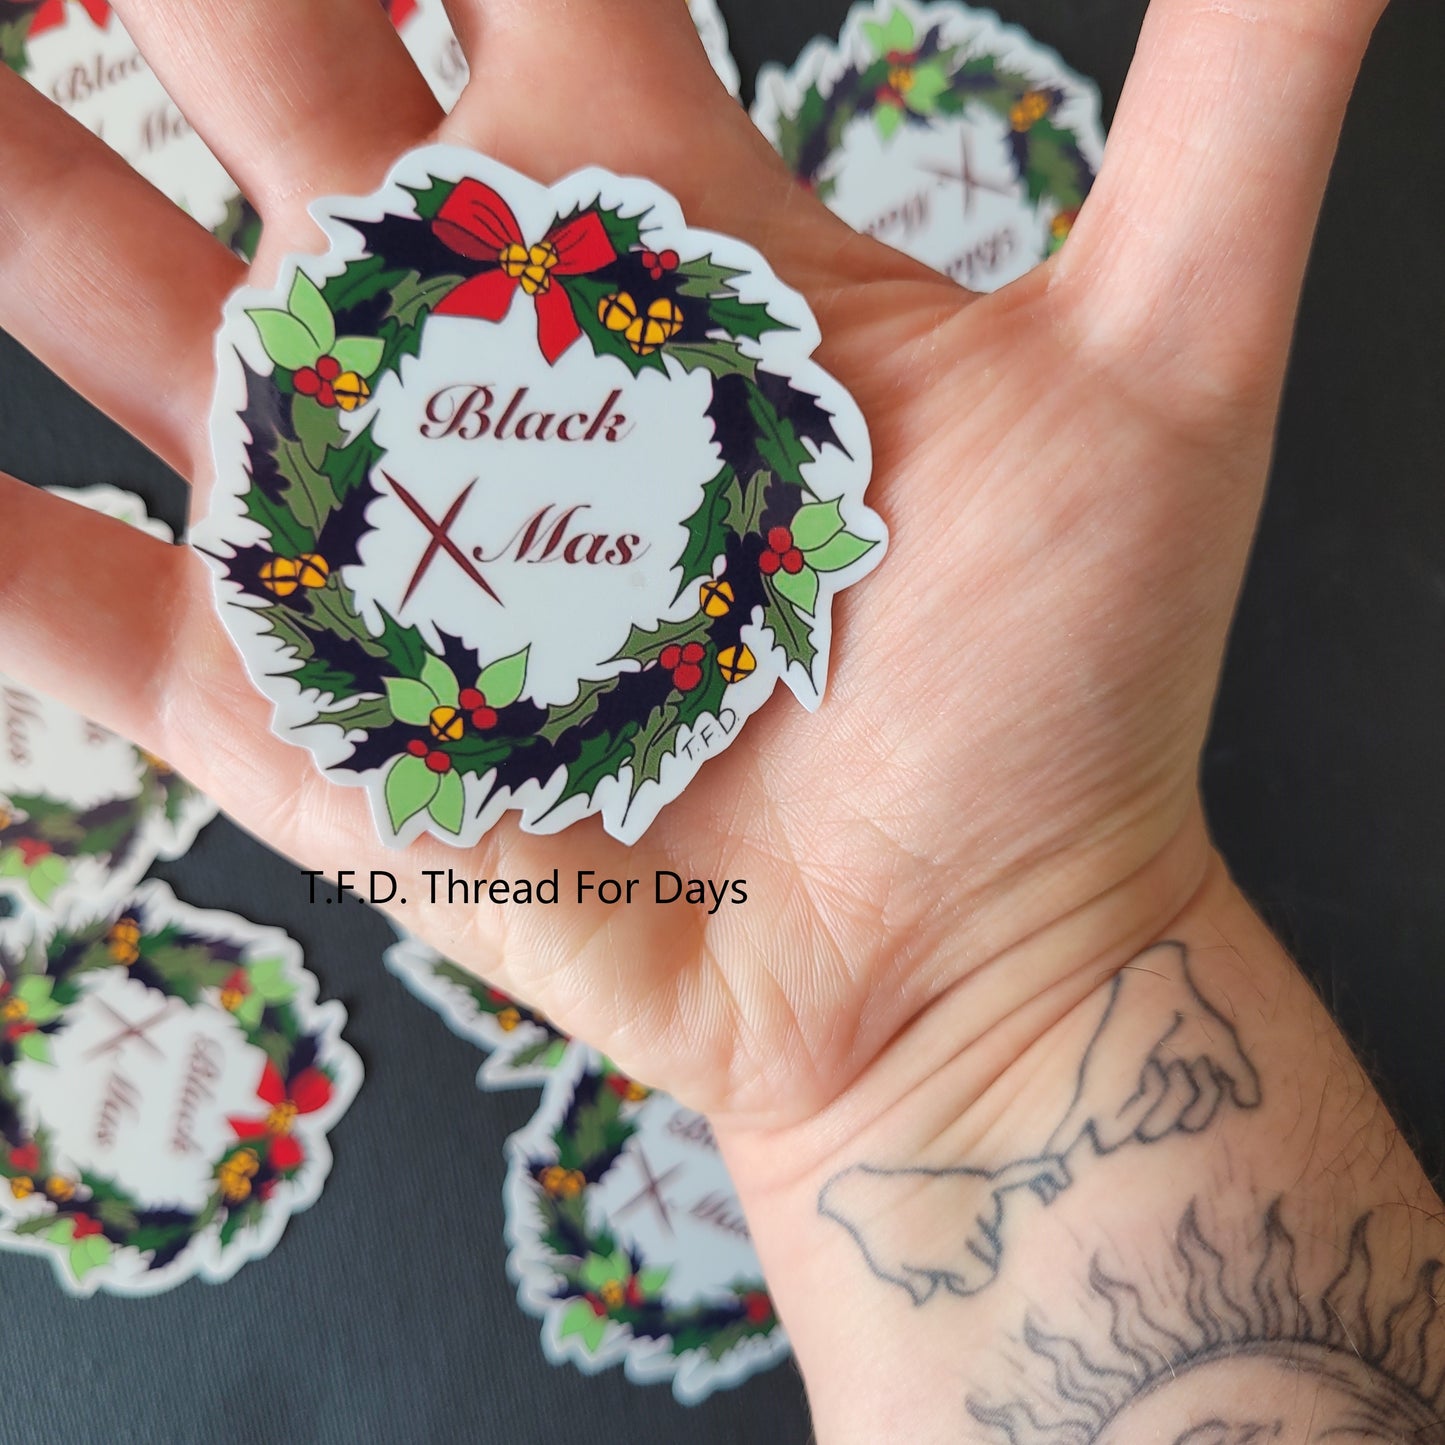 black xmas sticker held in palm of hand to demonstrate size